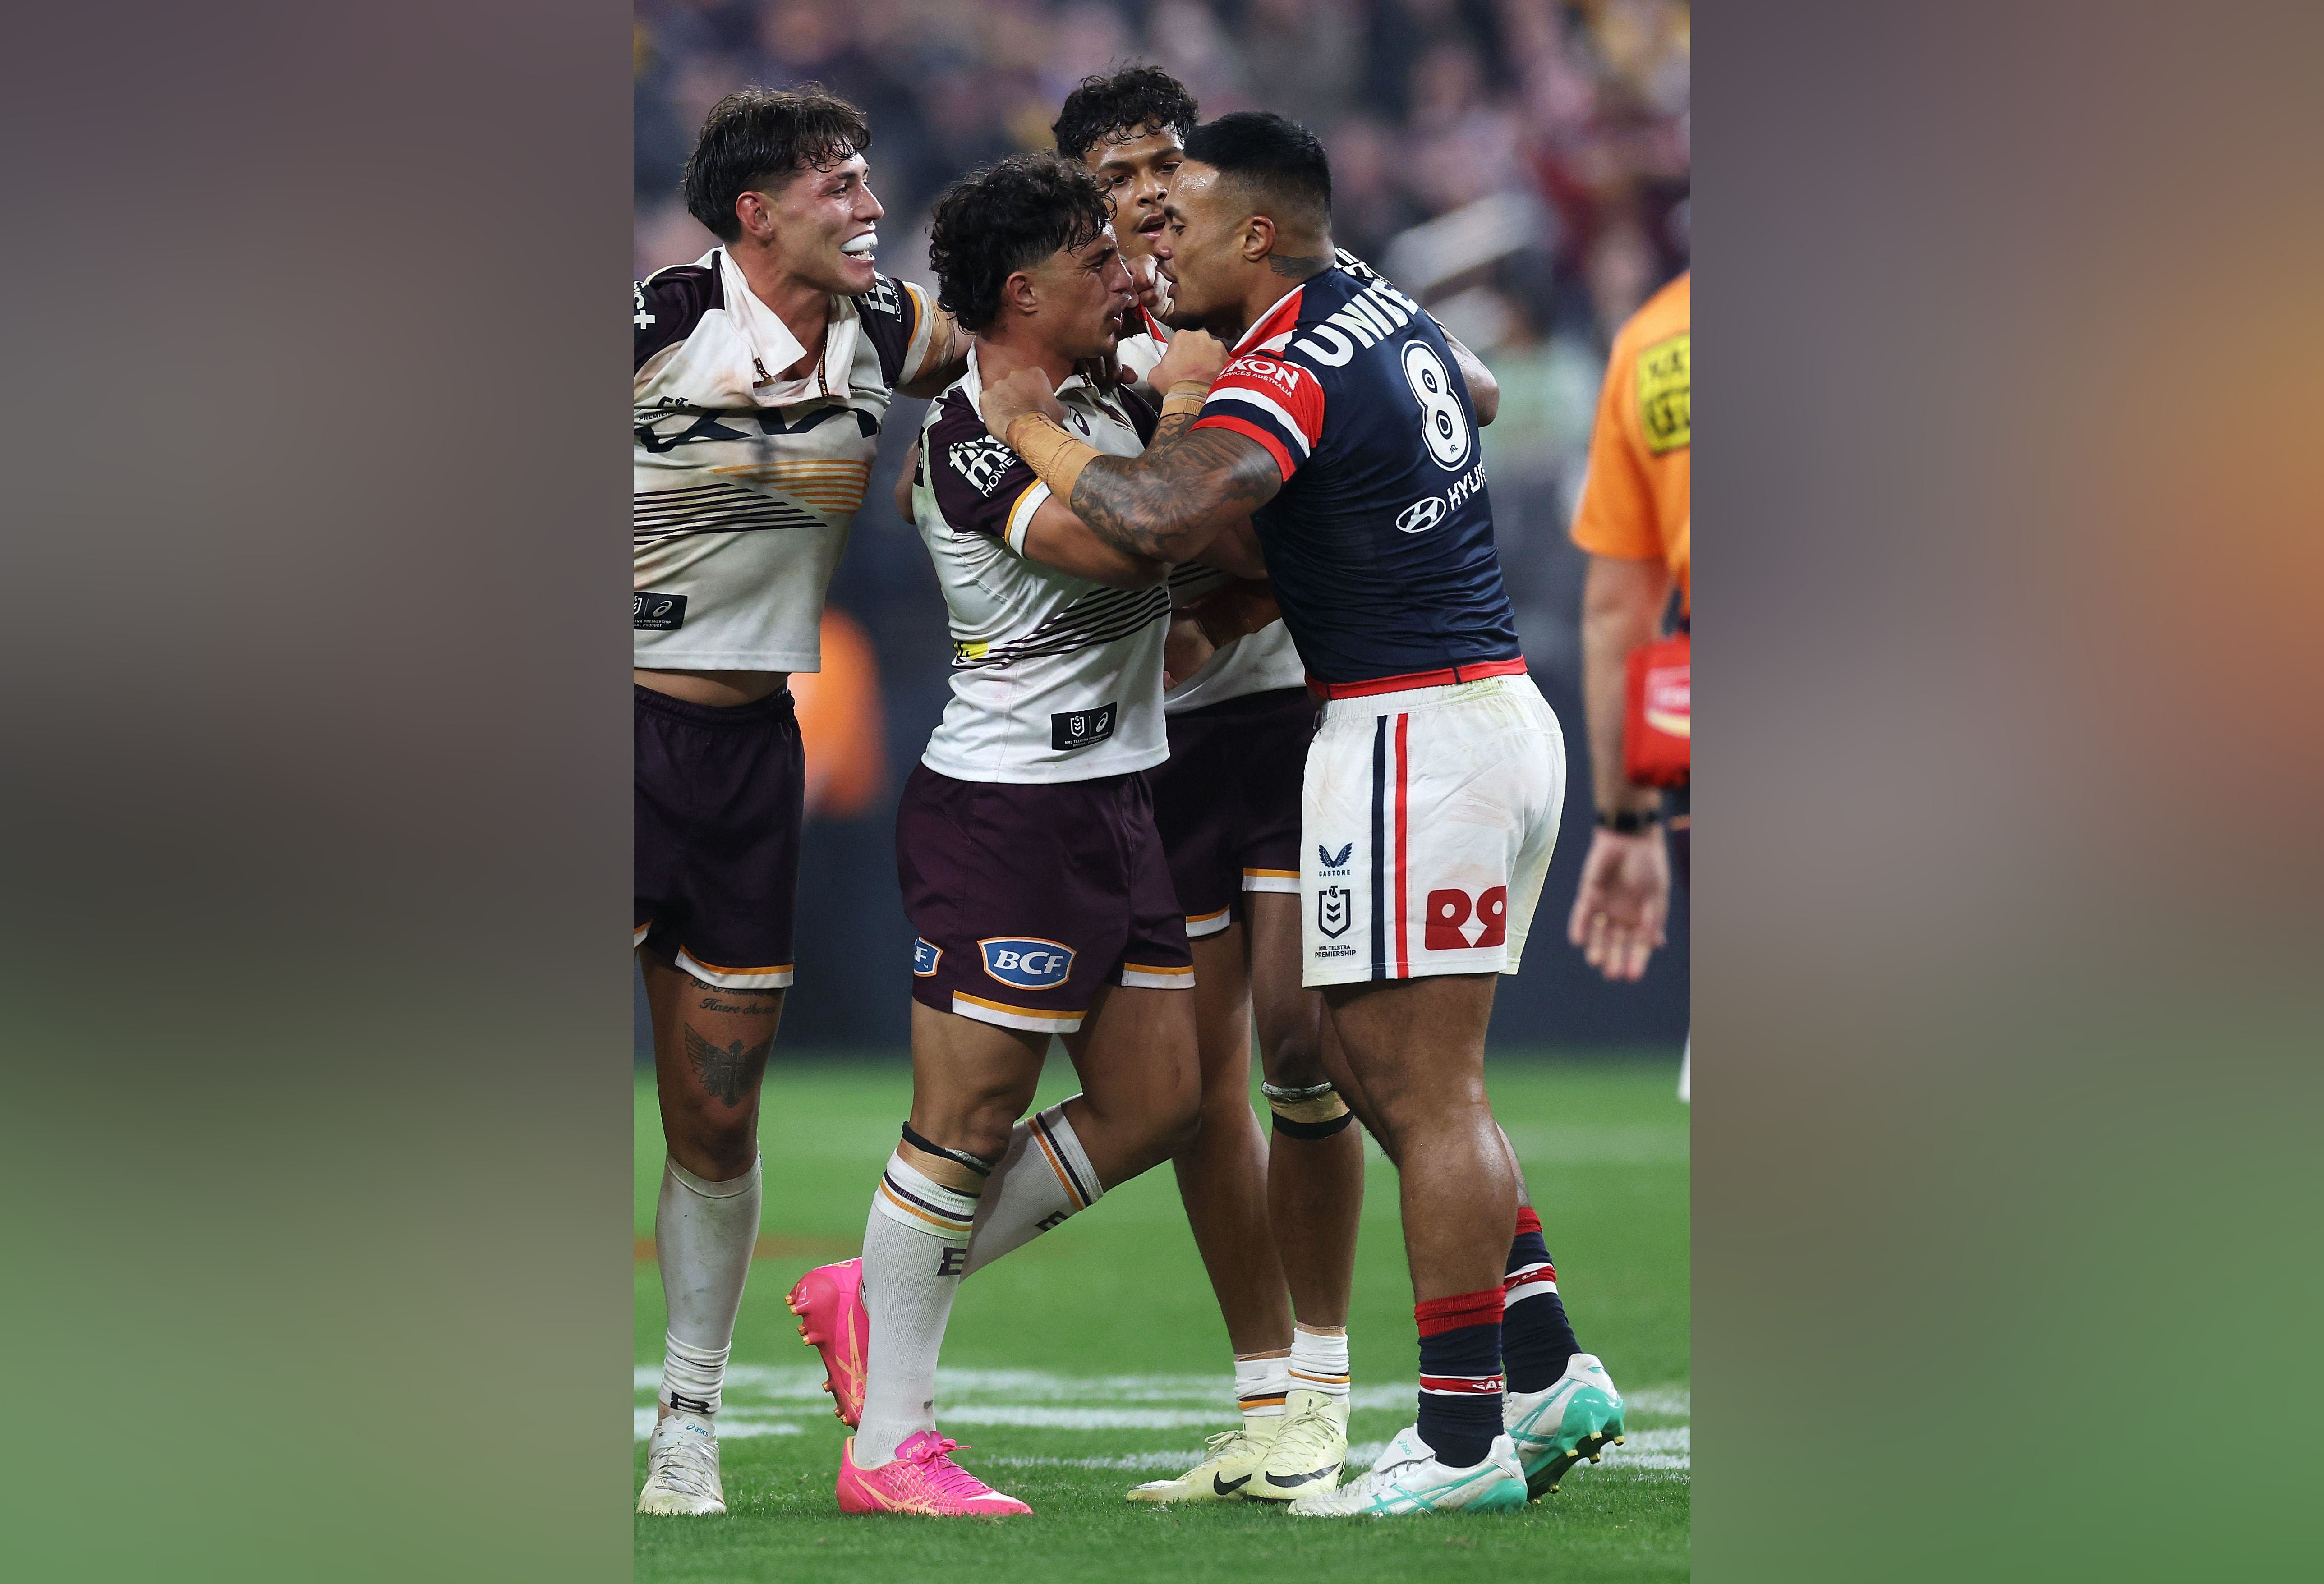 Australian rugby league star accuses rival of racial slur in US showcase